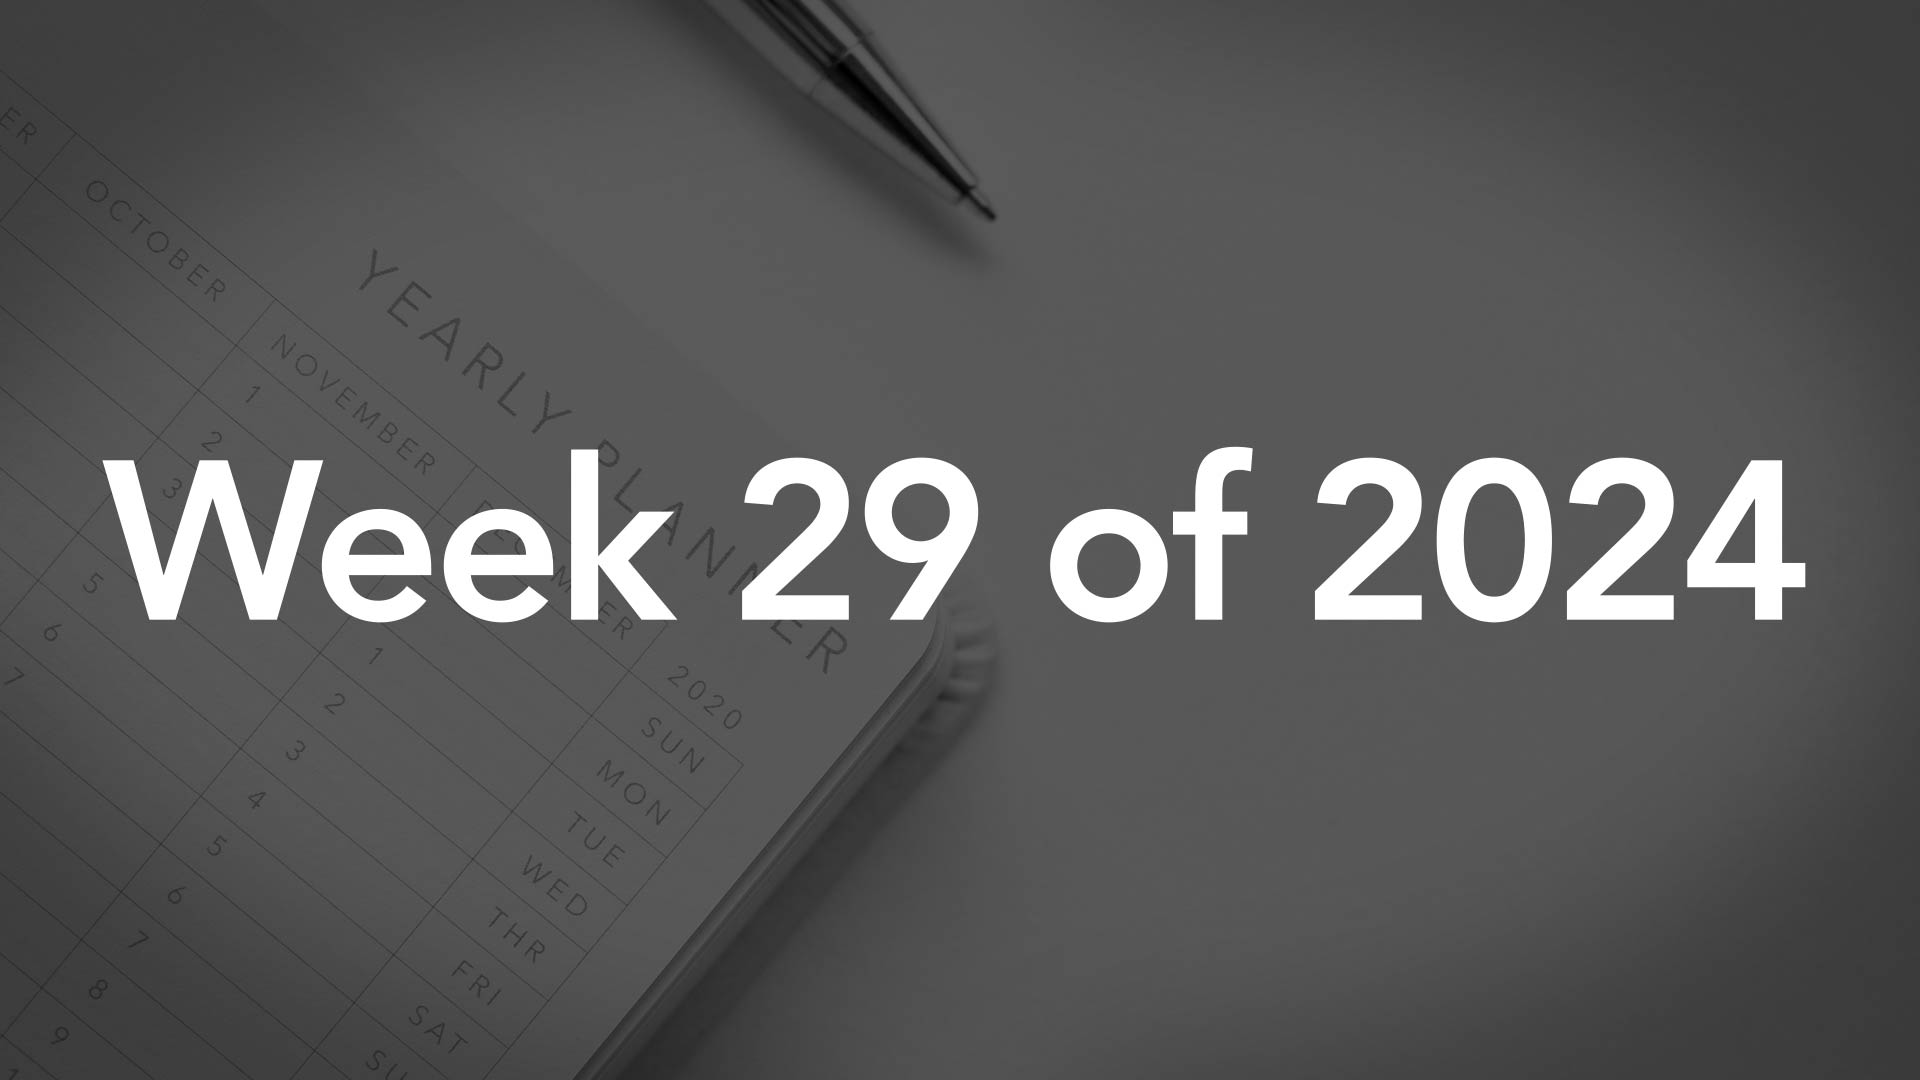 A complete list of National Days to celebrate during Week 29 of 2024